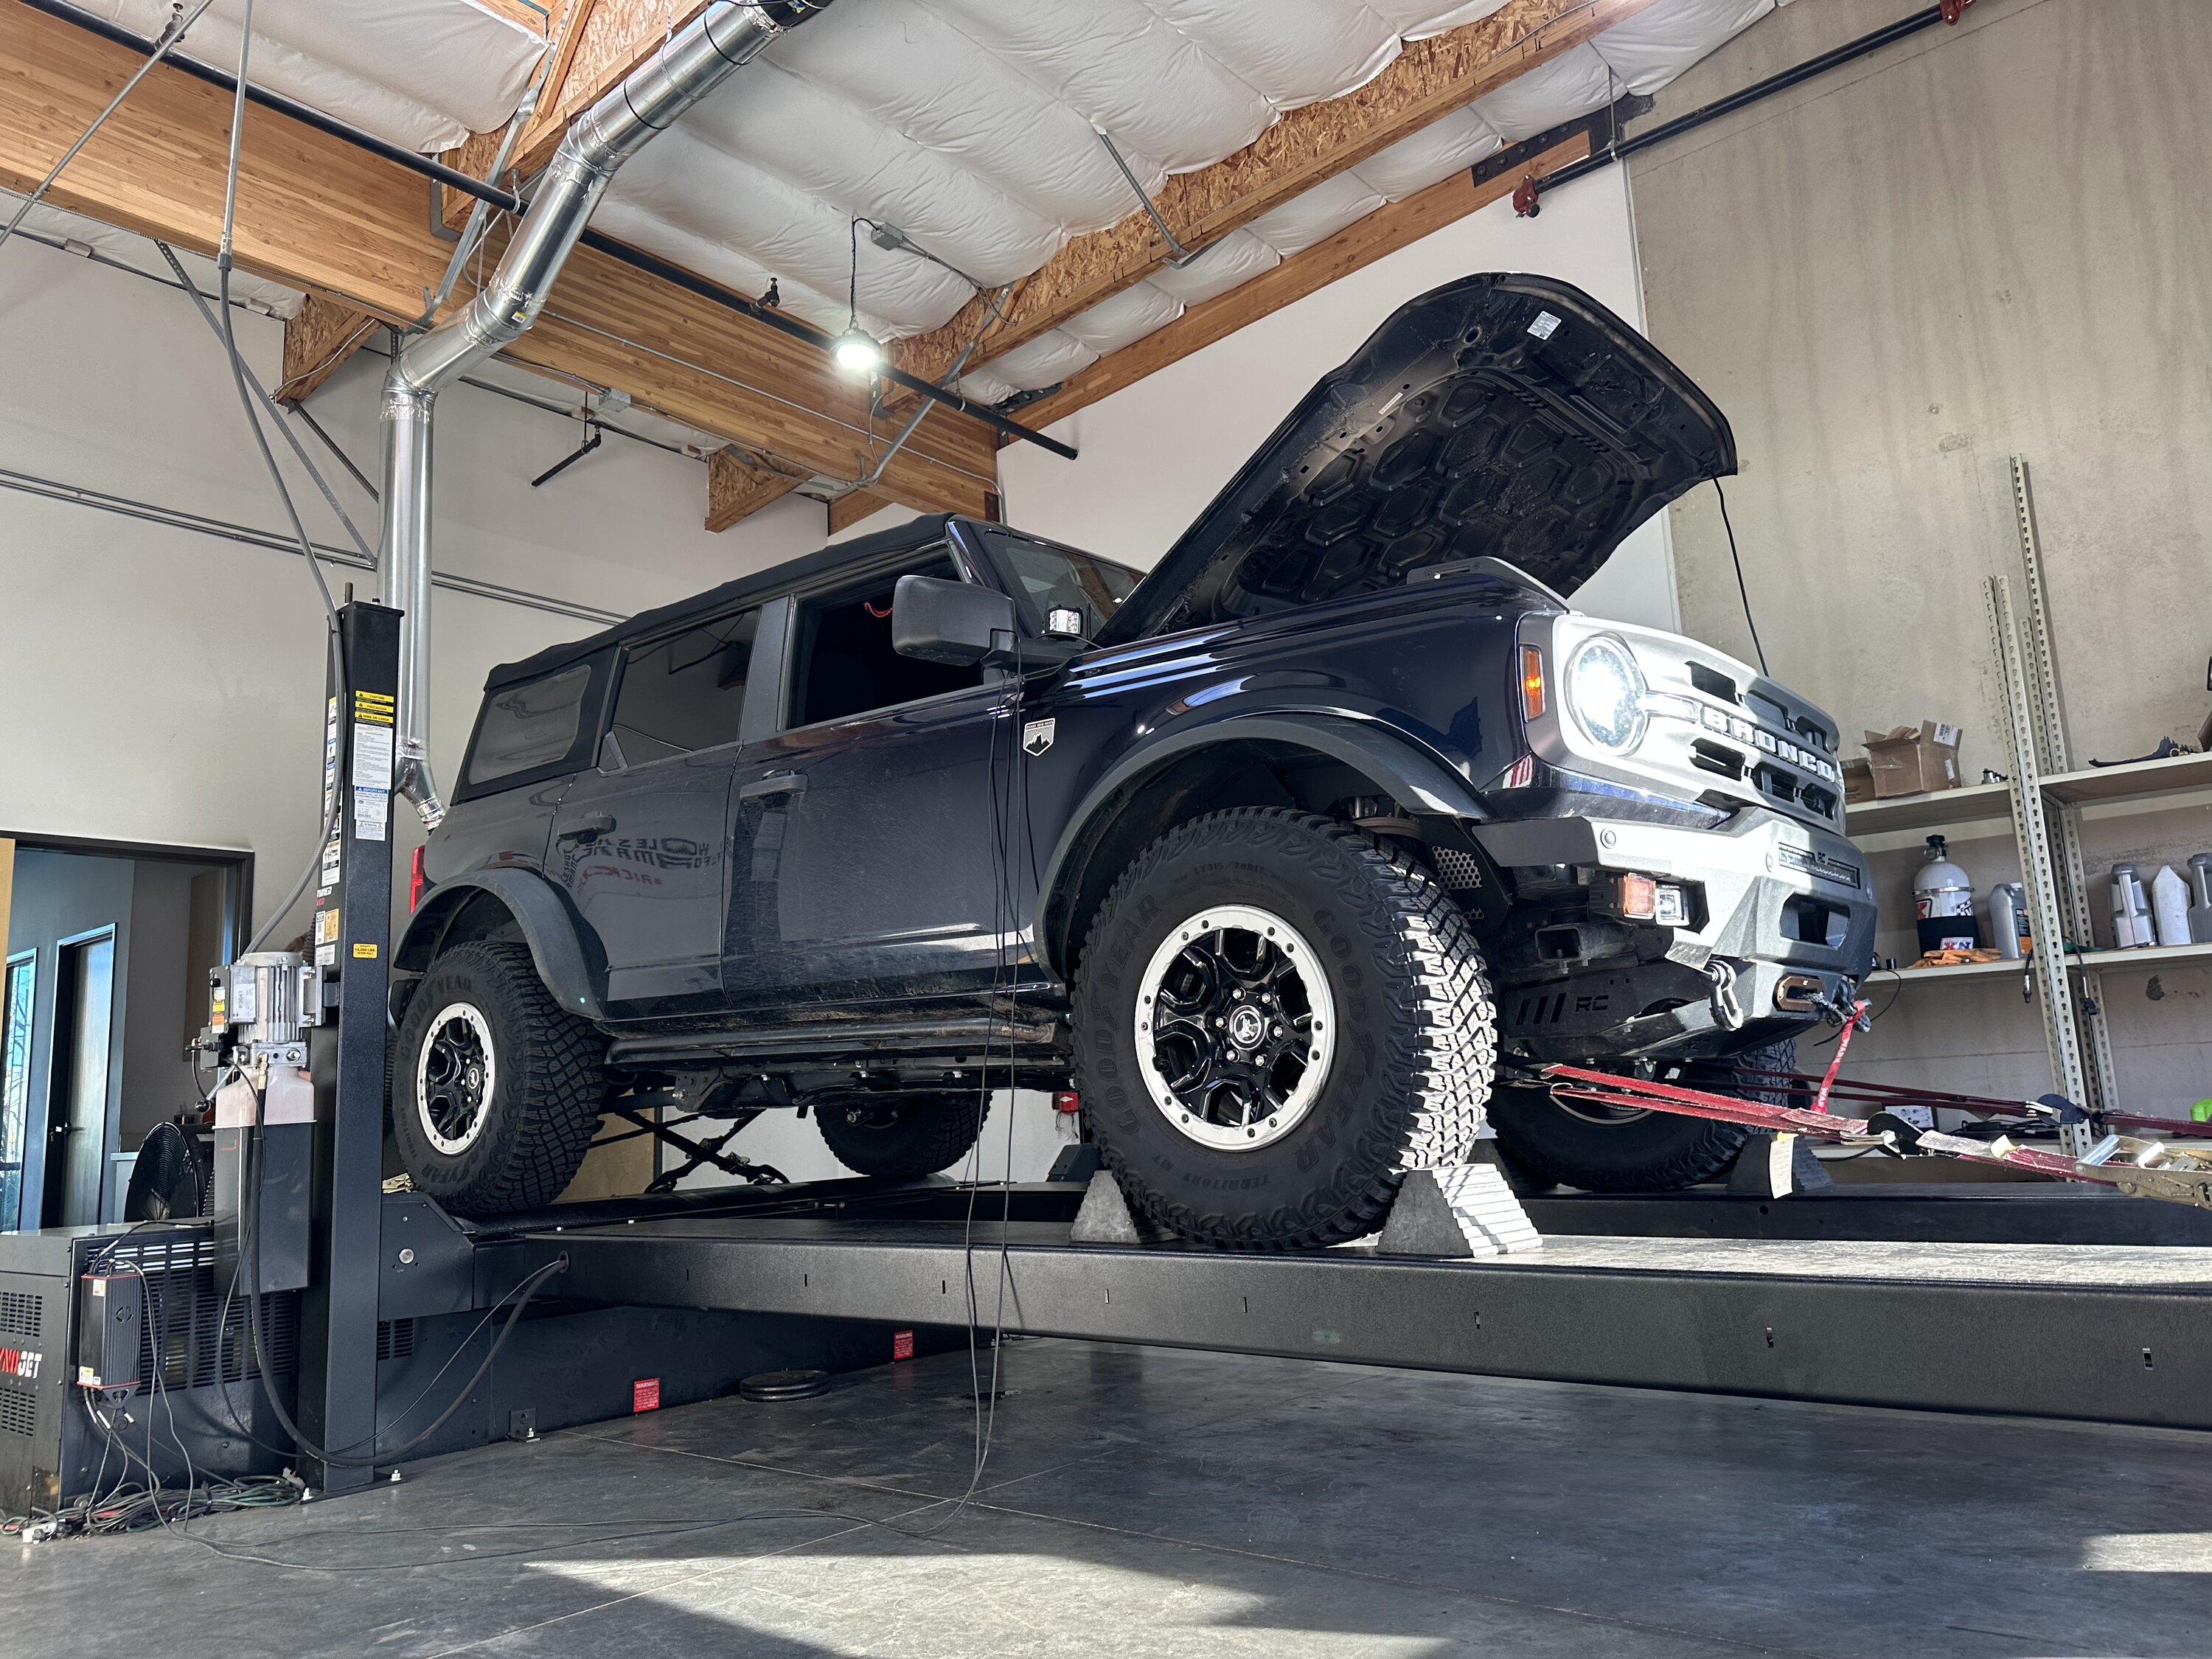 Ford Bronco Ford Performance Tune installed on 2.3 Bronco (before and after dyno numbers!) 3259B034-B6F3-4AC4-B561-8FD5CEA9146C